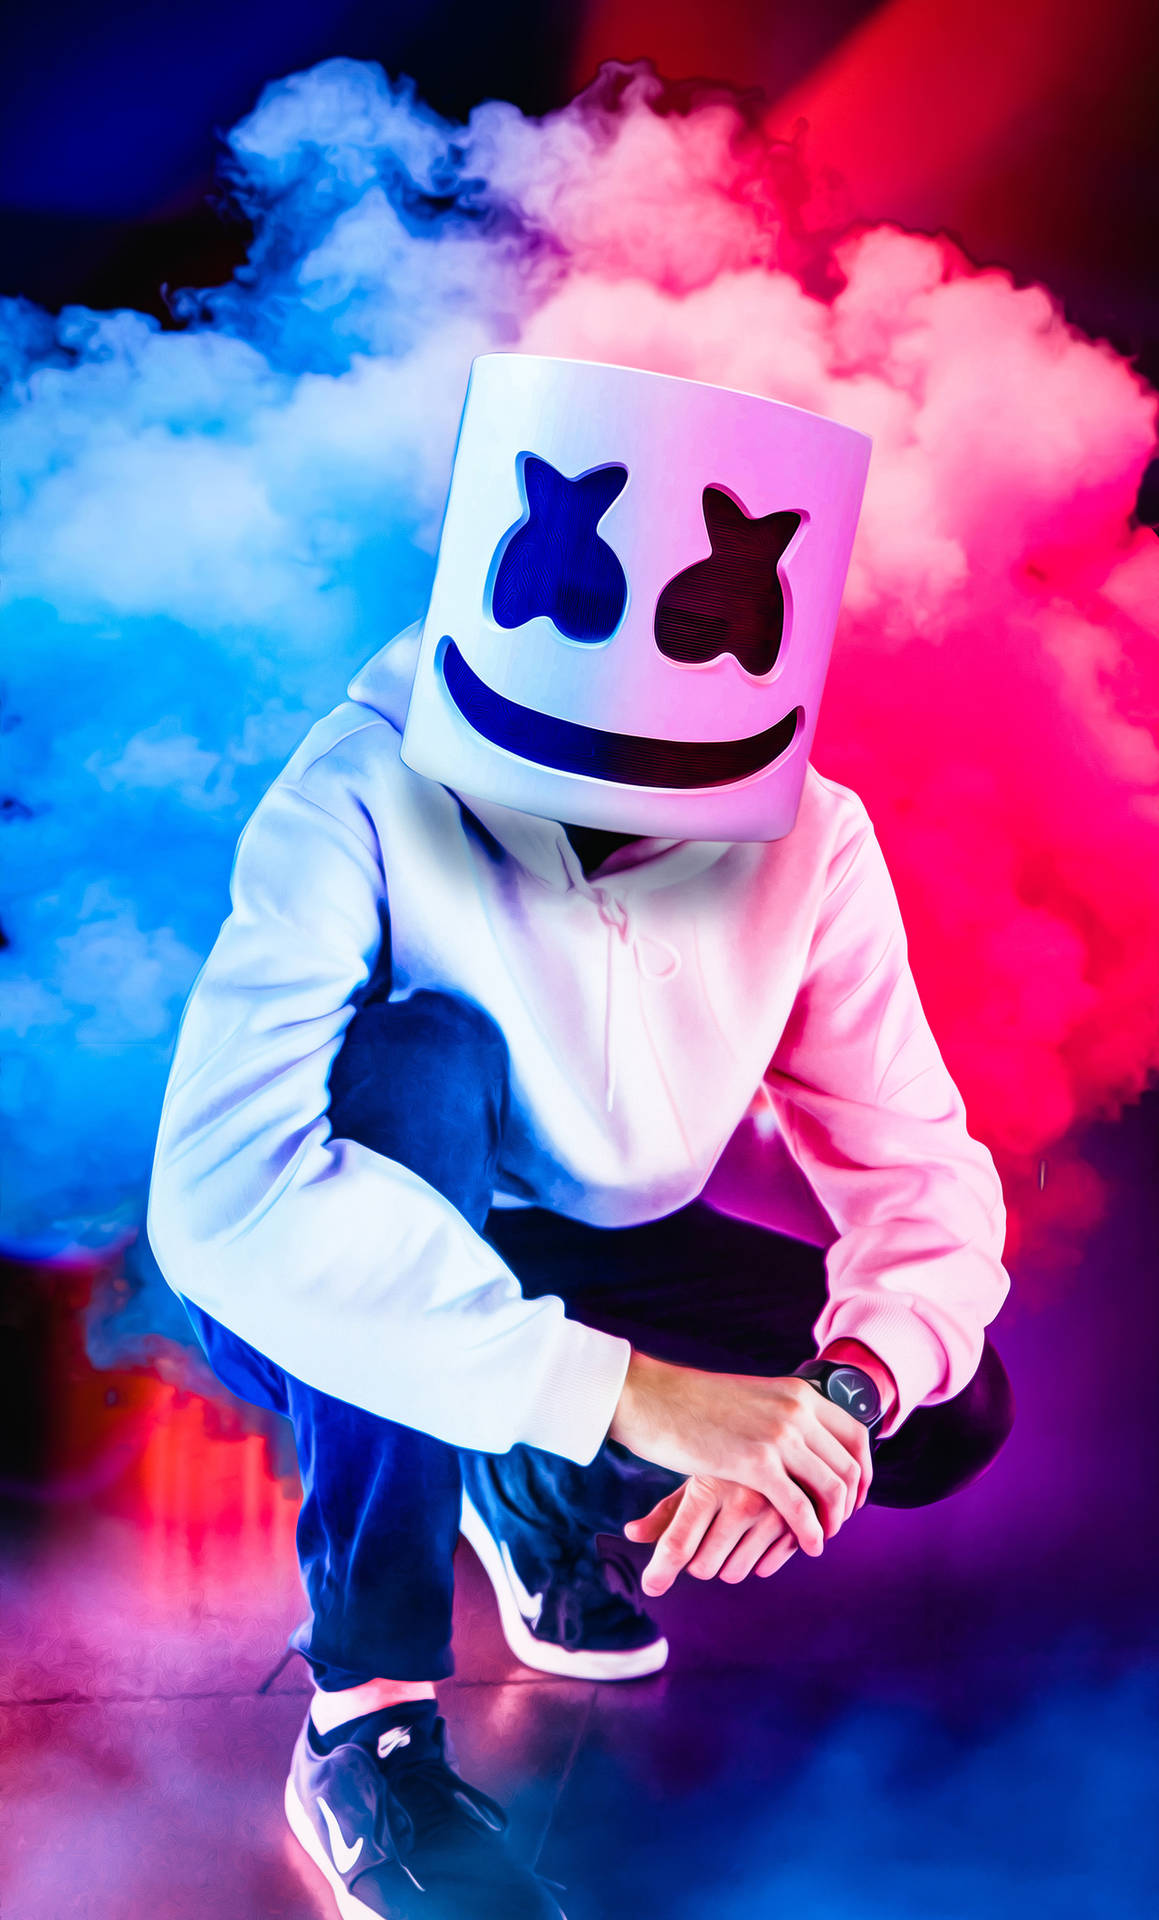 Colorful Smoky Background With Marshmello Hd Iphone Wallpaper